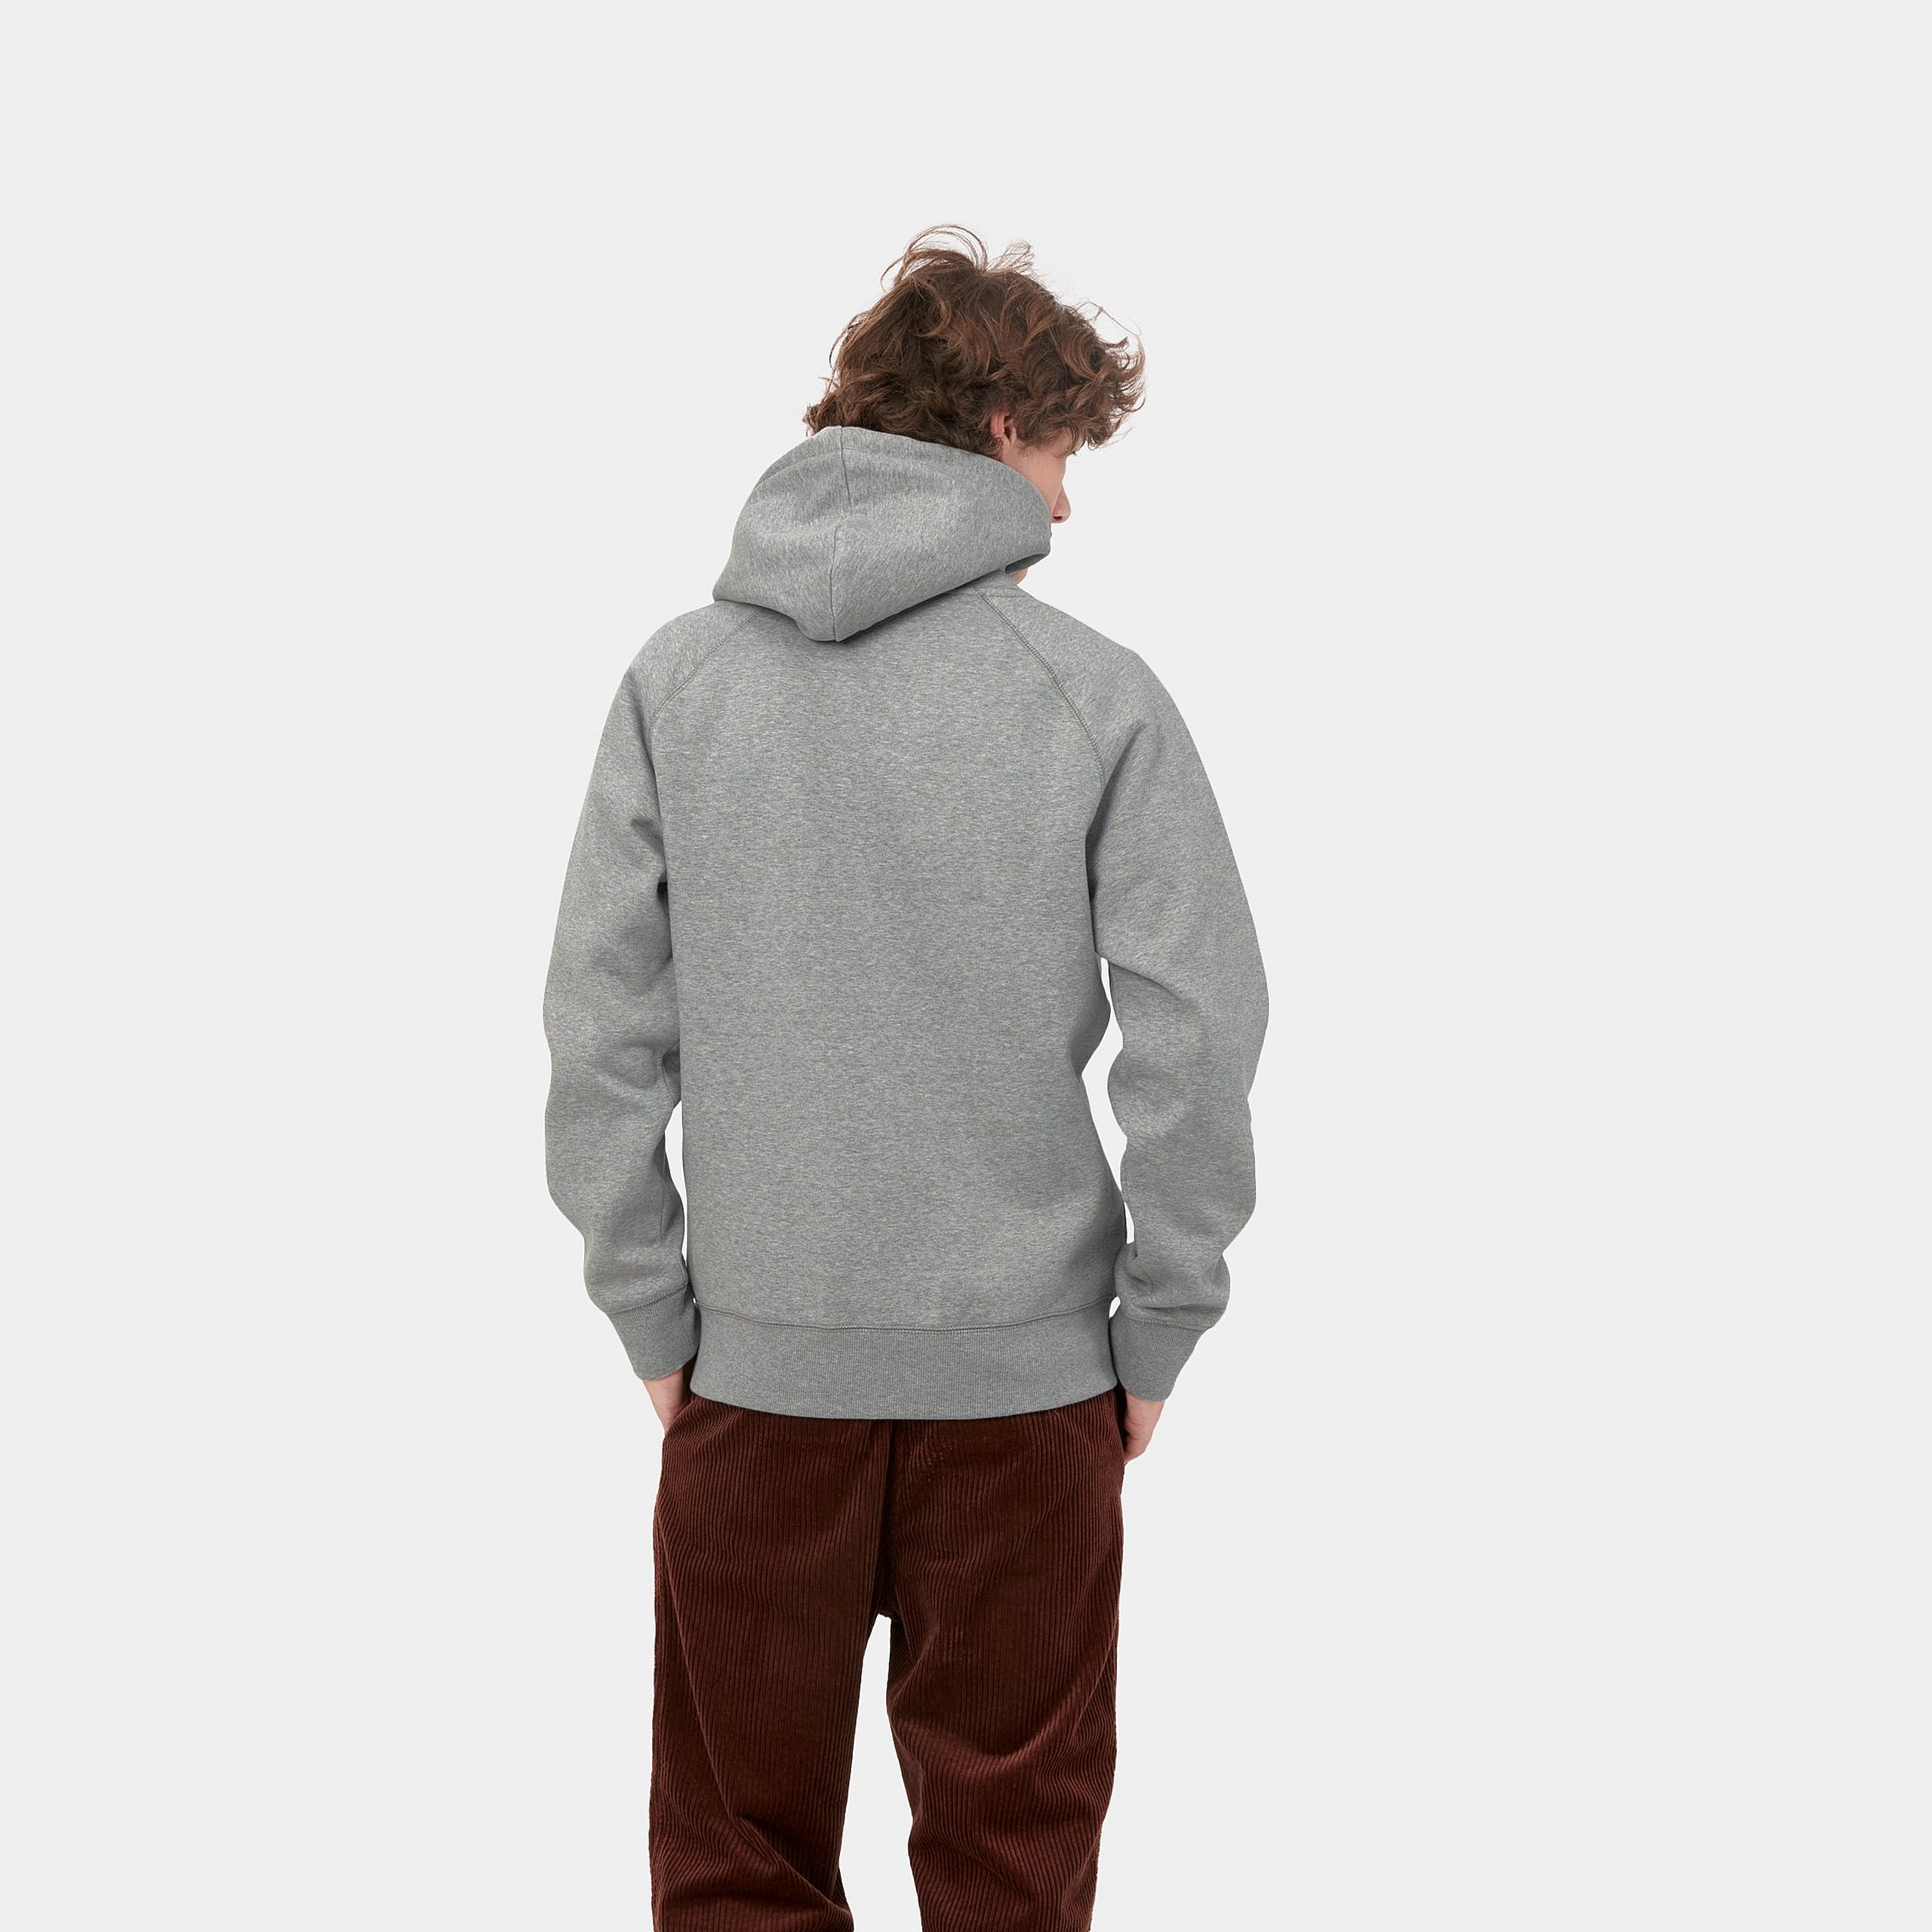 Chase Hooded Sweat - Grey Heather/Gold